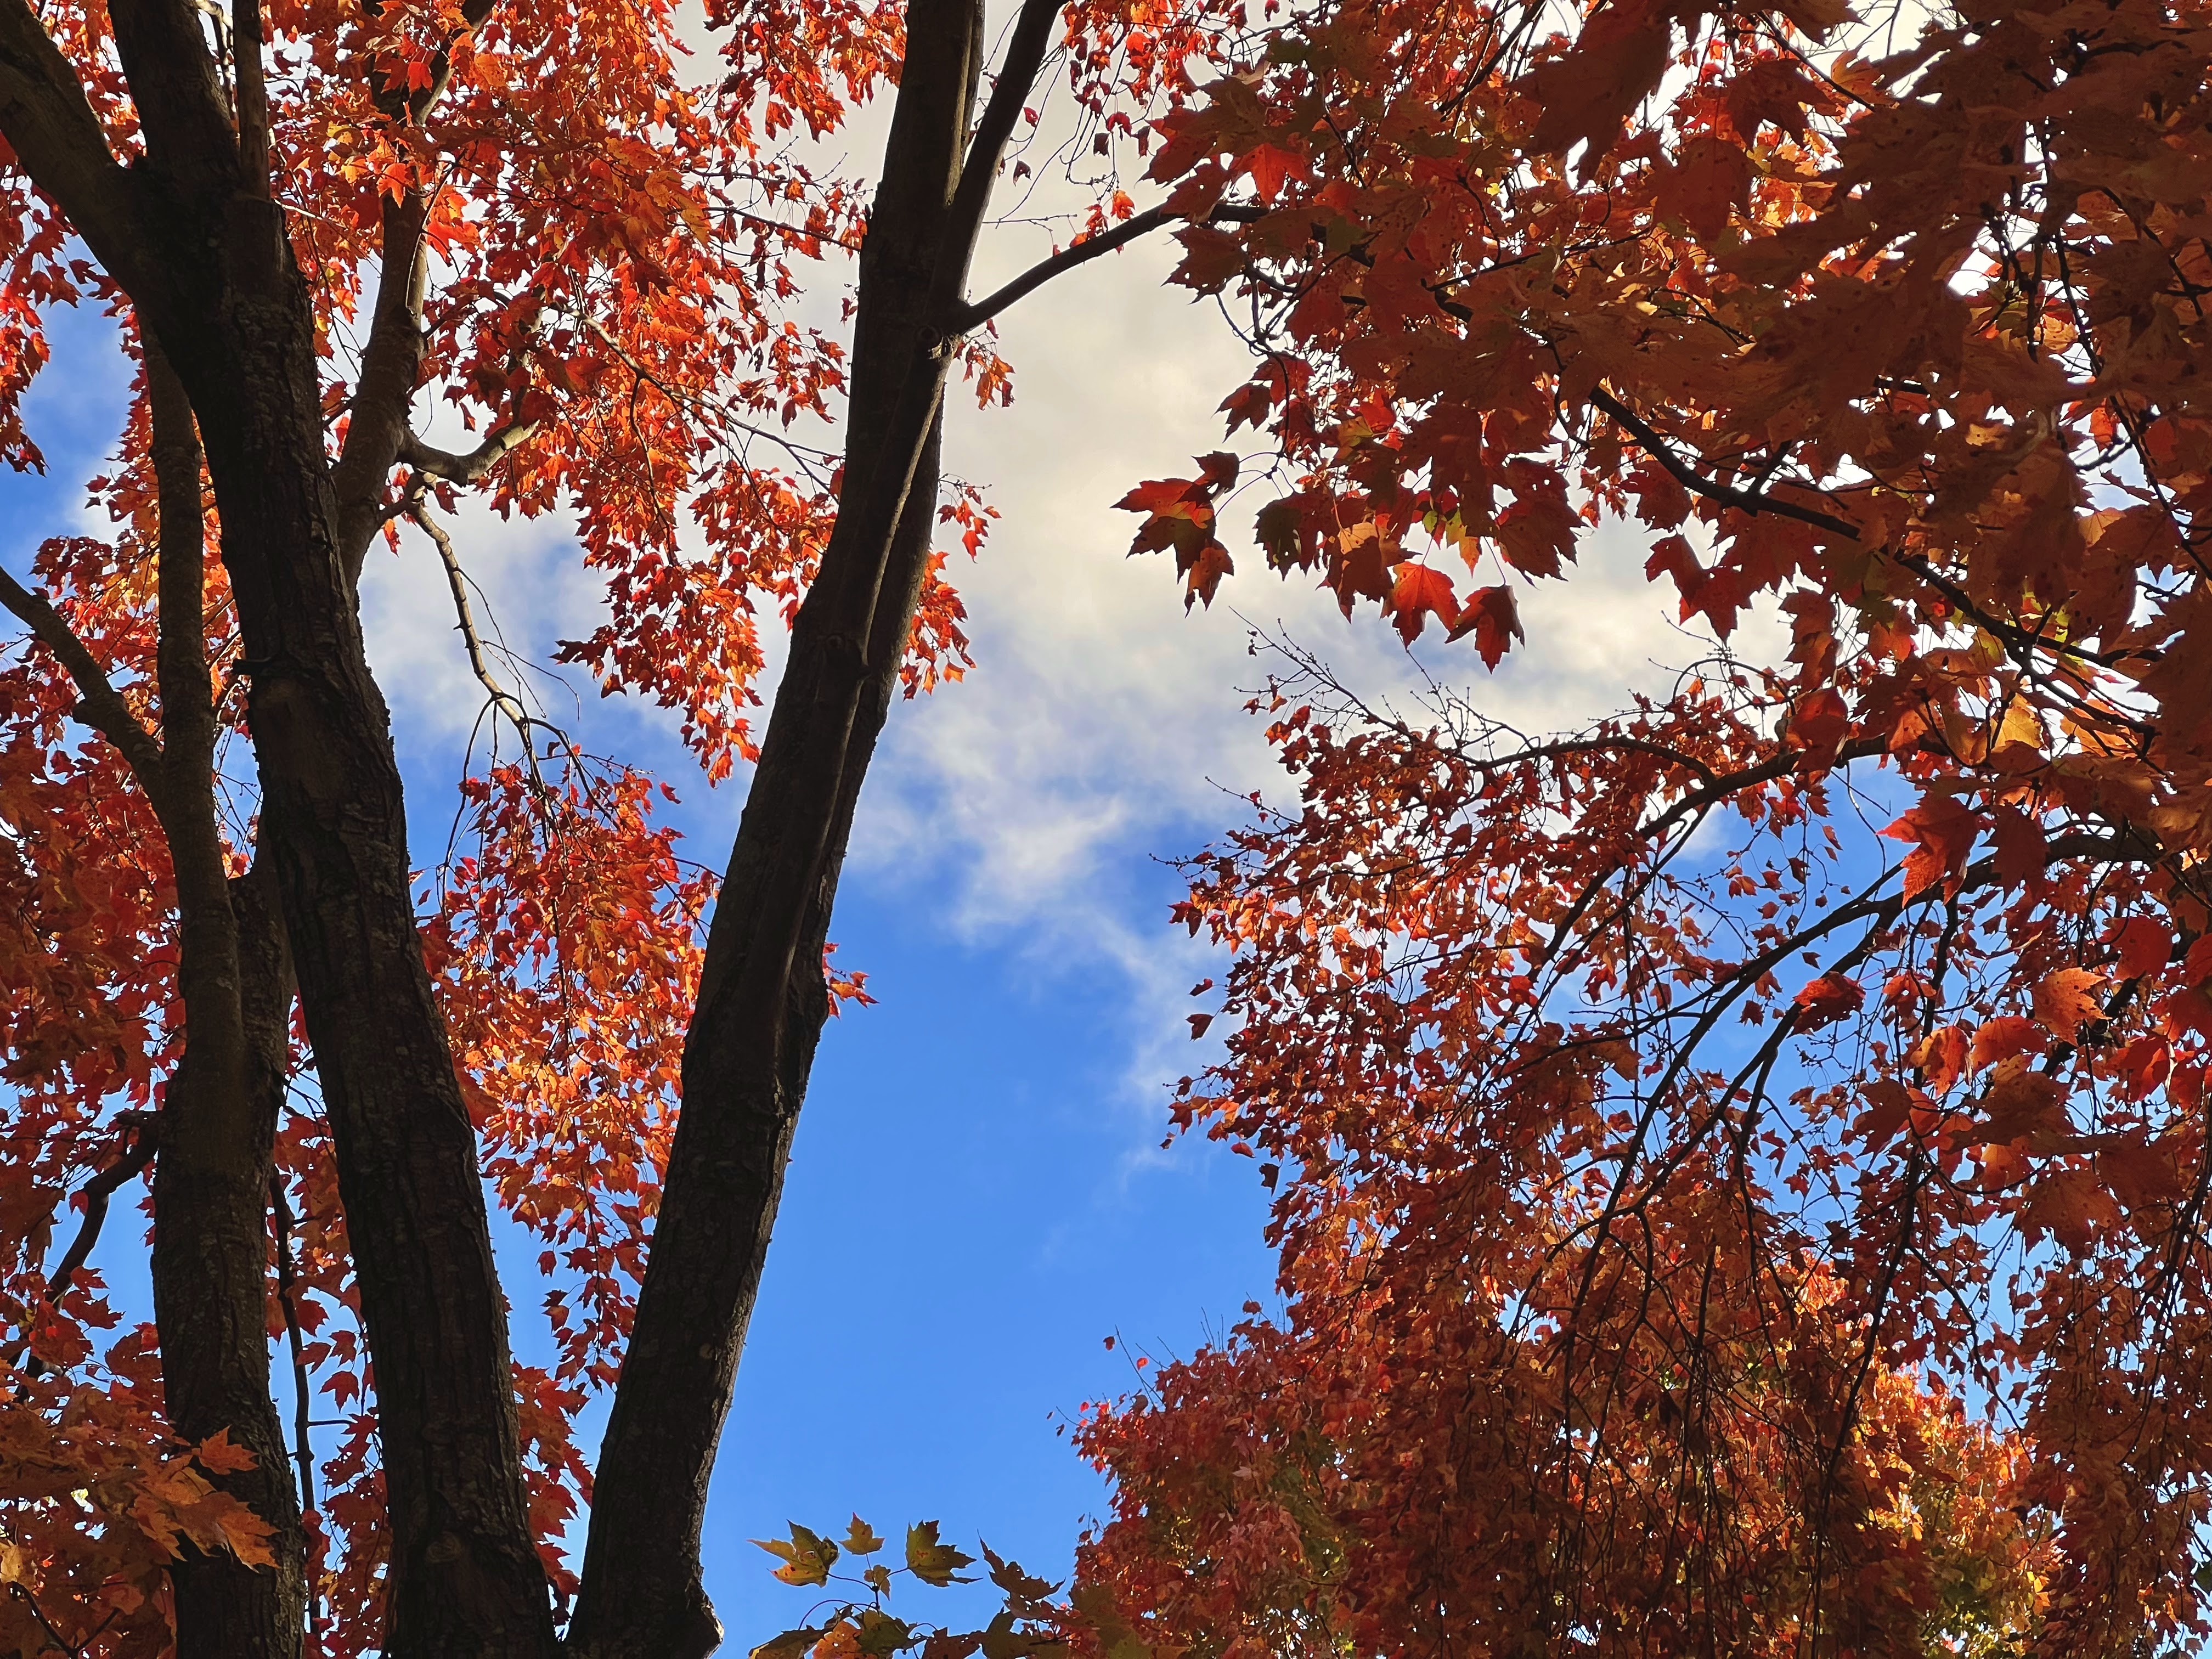 Looking through vivid red leafed trees and thick black tree trunks a vivid blue sky is revealed.